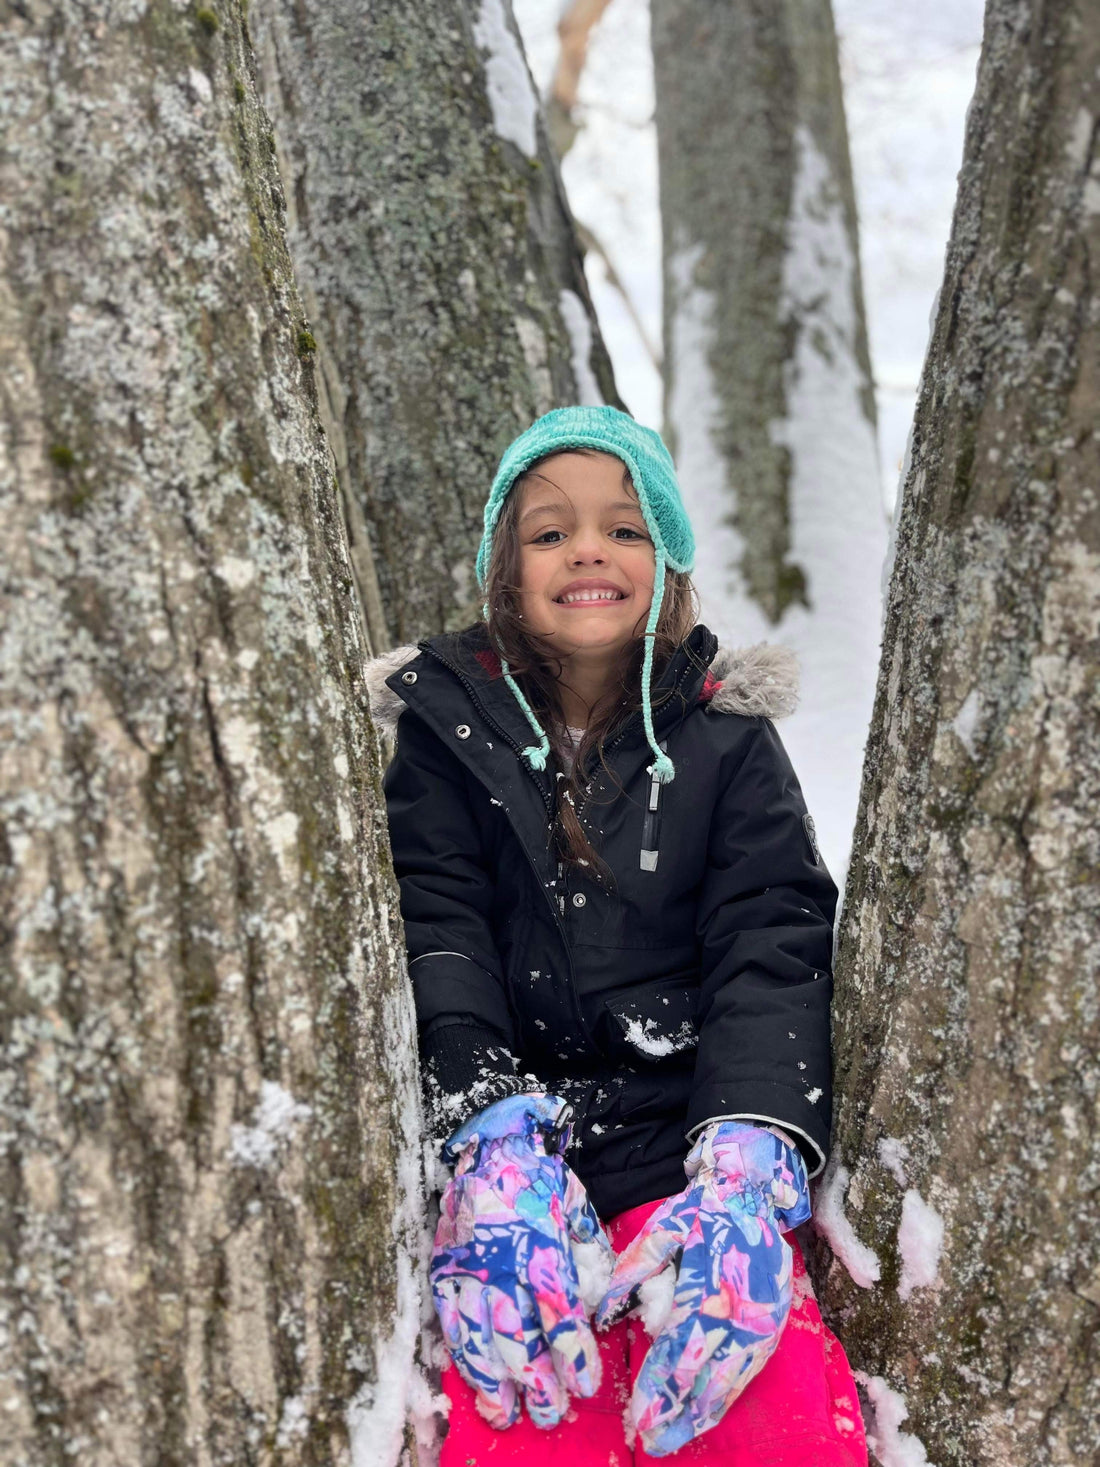 Picture of a child wearing winter outerwear sitting in a snowy tree 